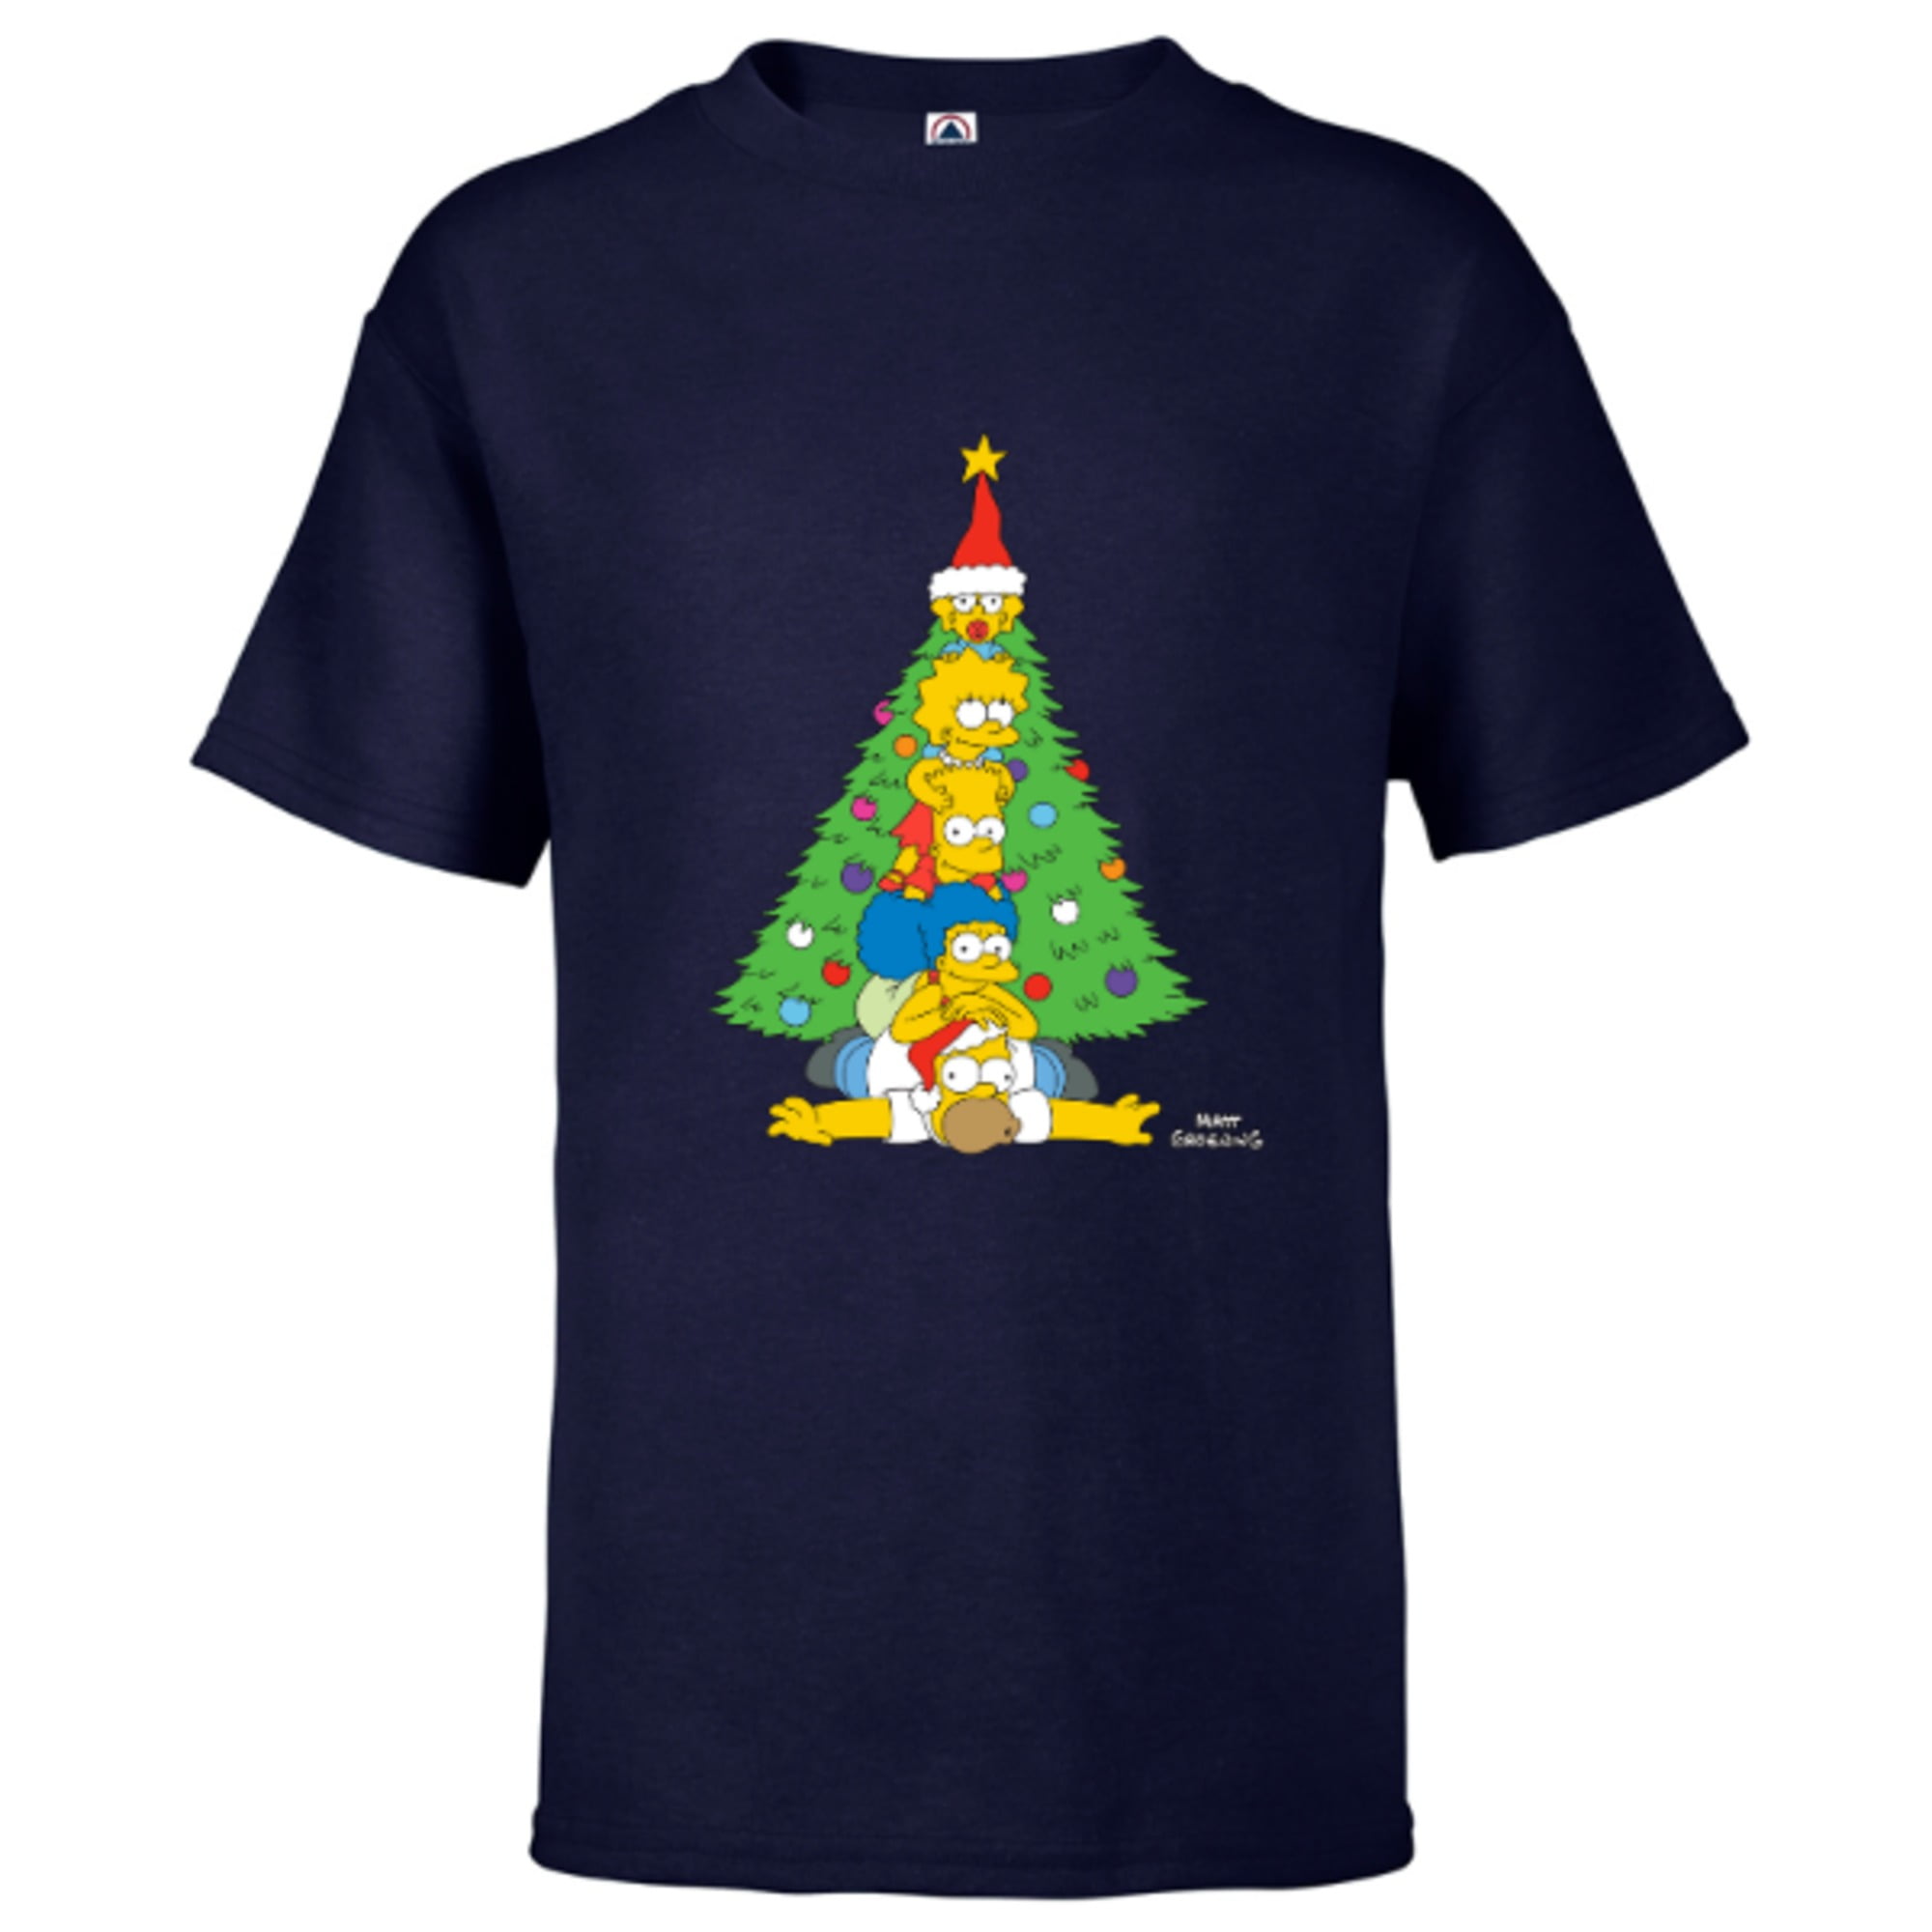 The Simpsons Family Christmas Tree Customized-Red Kids T-Shirt - Sleeve – Short Holiday for